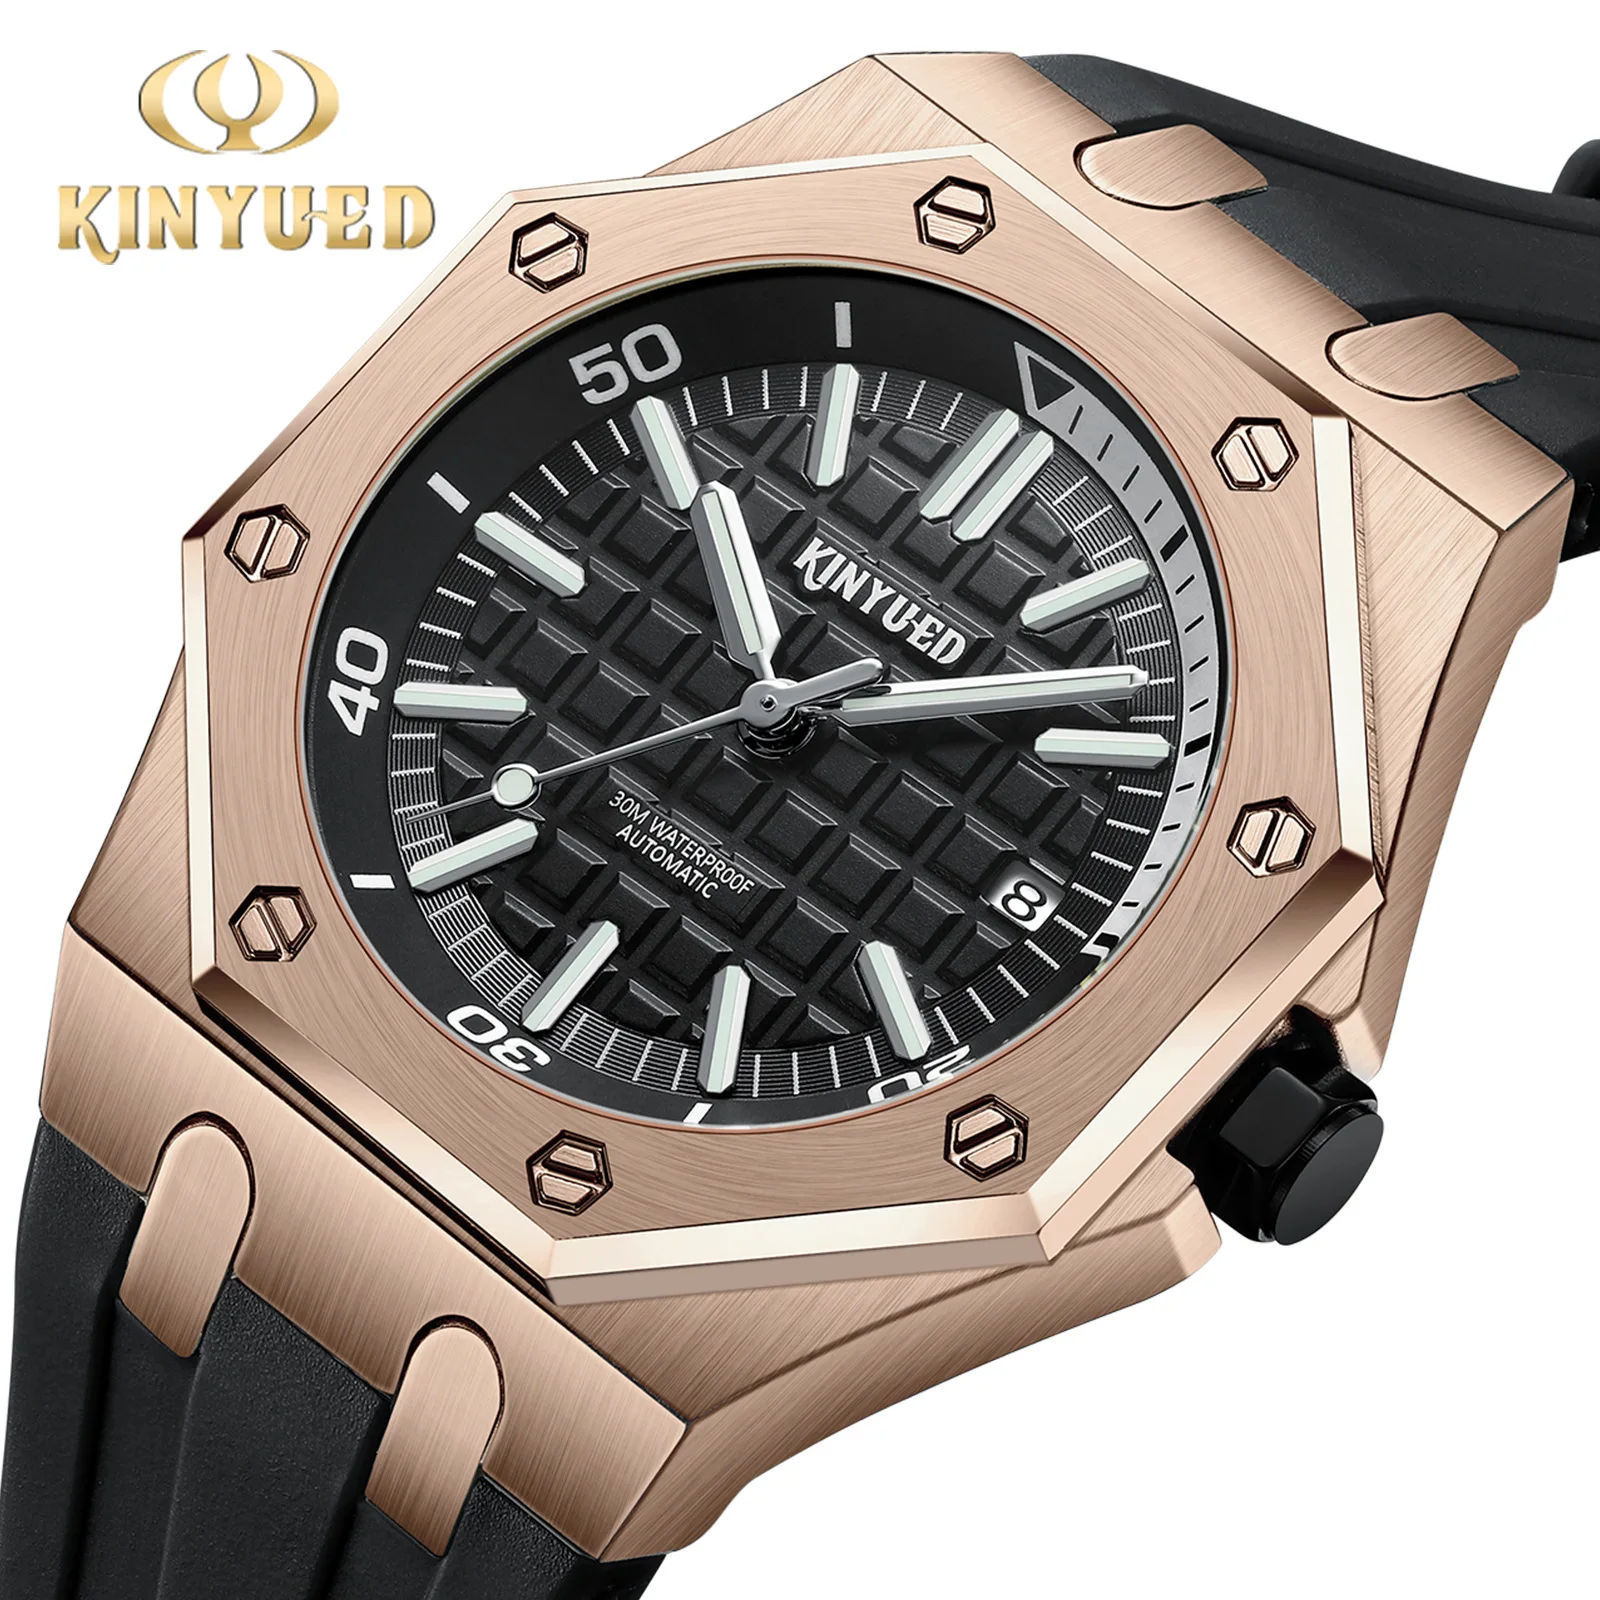 KINYUED/Jin Yueda-New listed fully automatic mechanical movement color multiple choice men's fashion watch